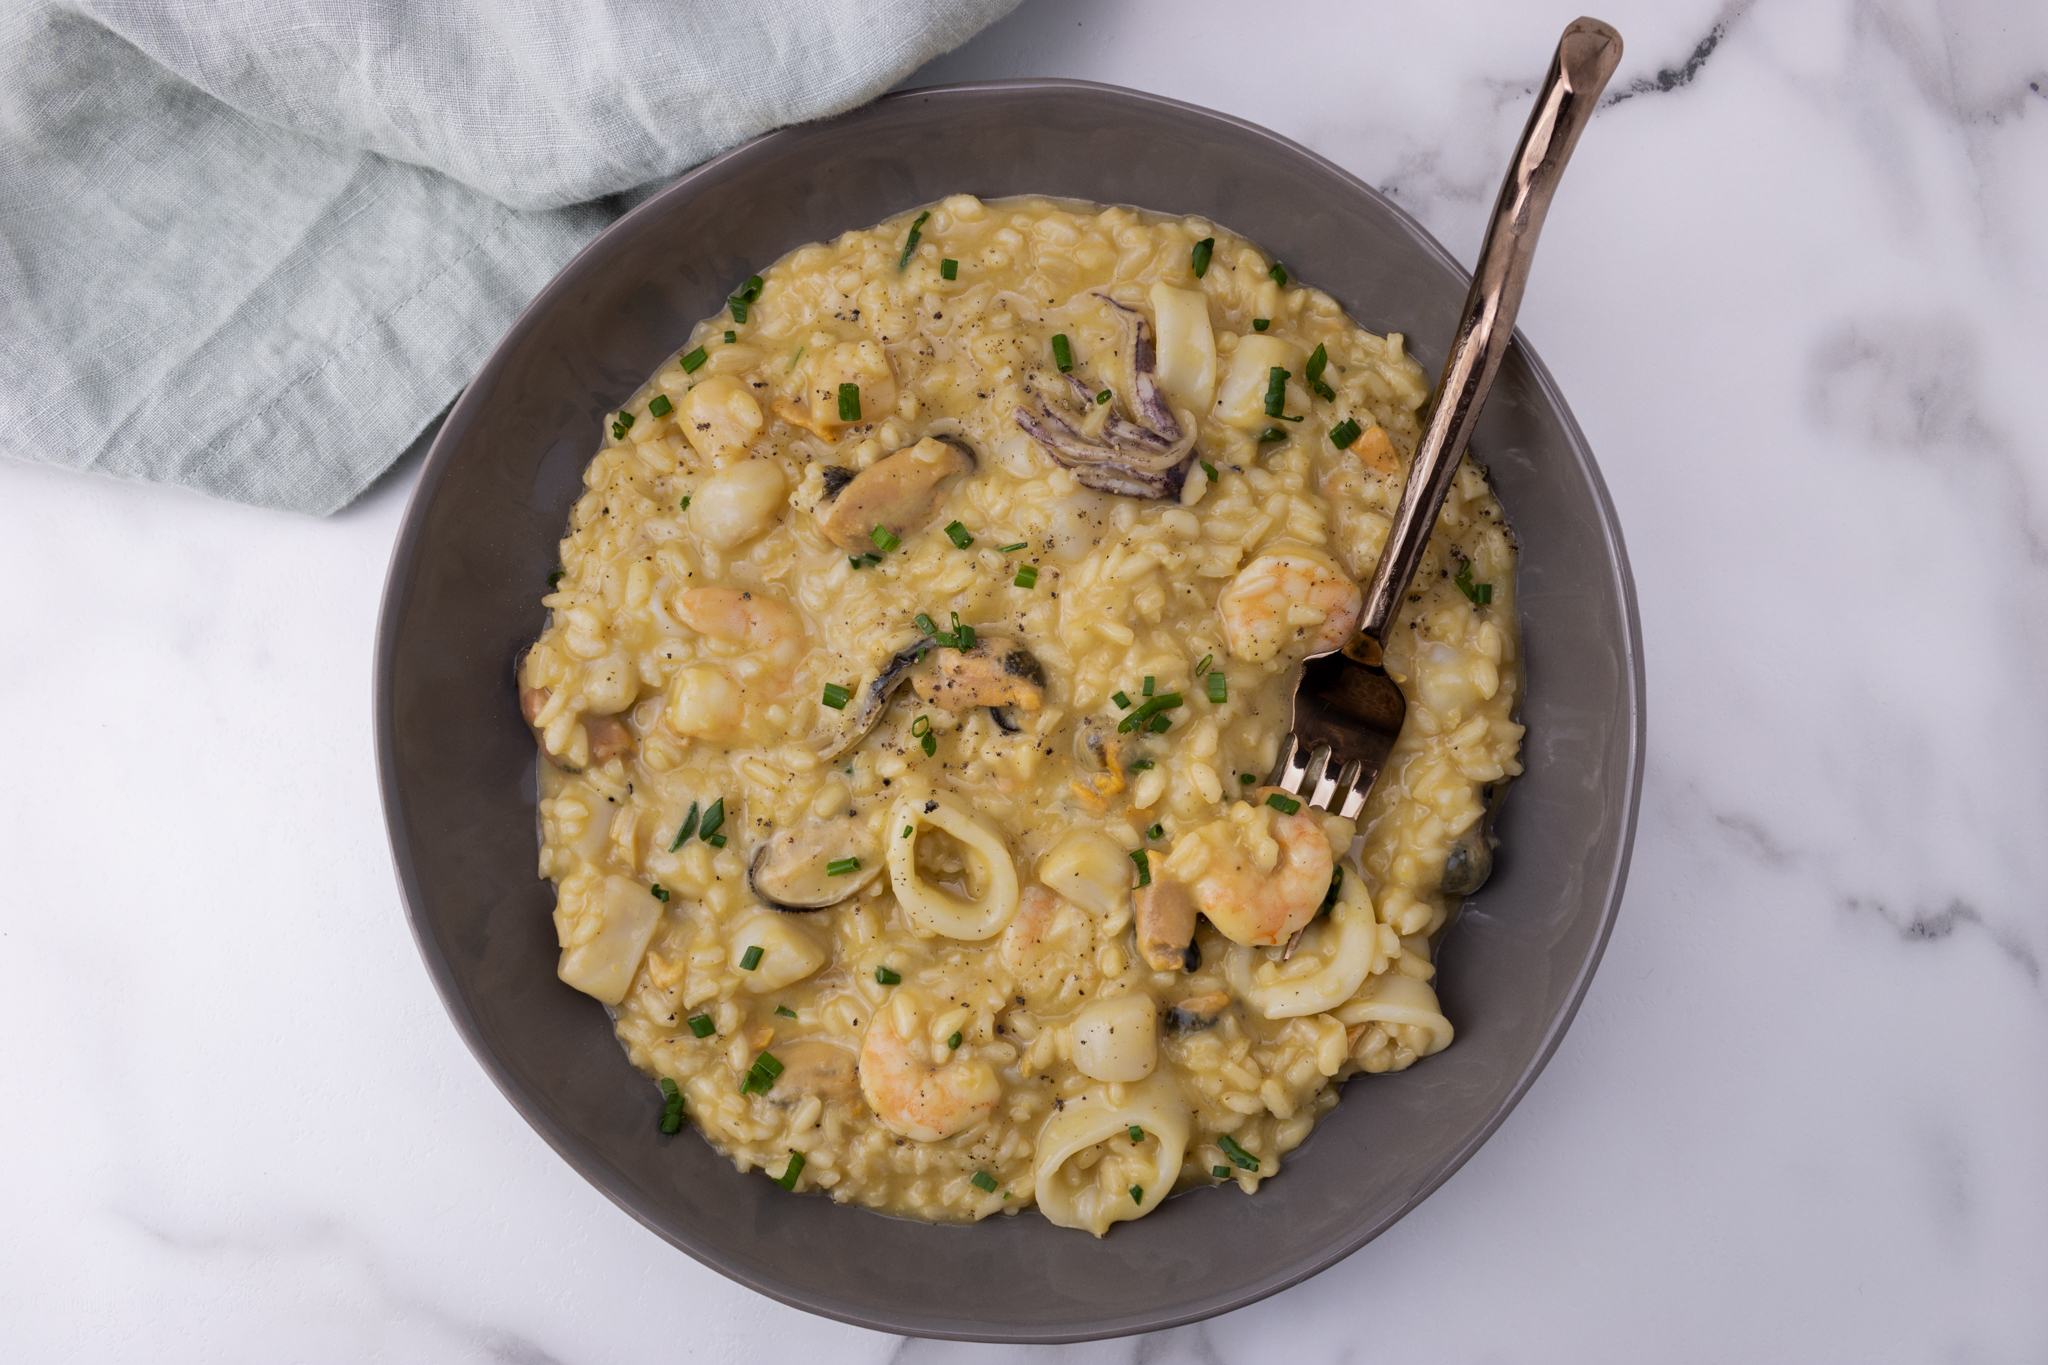 https://mylifeinanaprn.com/wp-content/uploads/2021/02/seafood-risotto-plated-full-shot.jpg